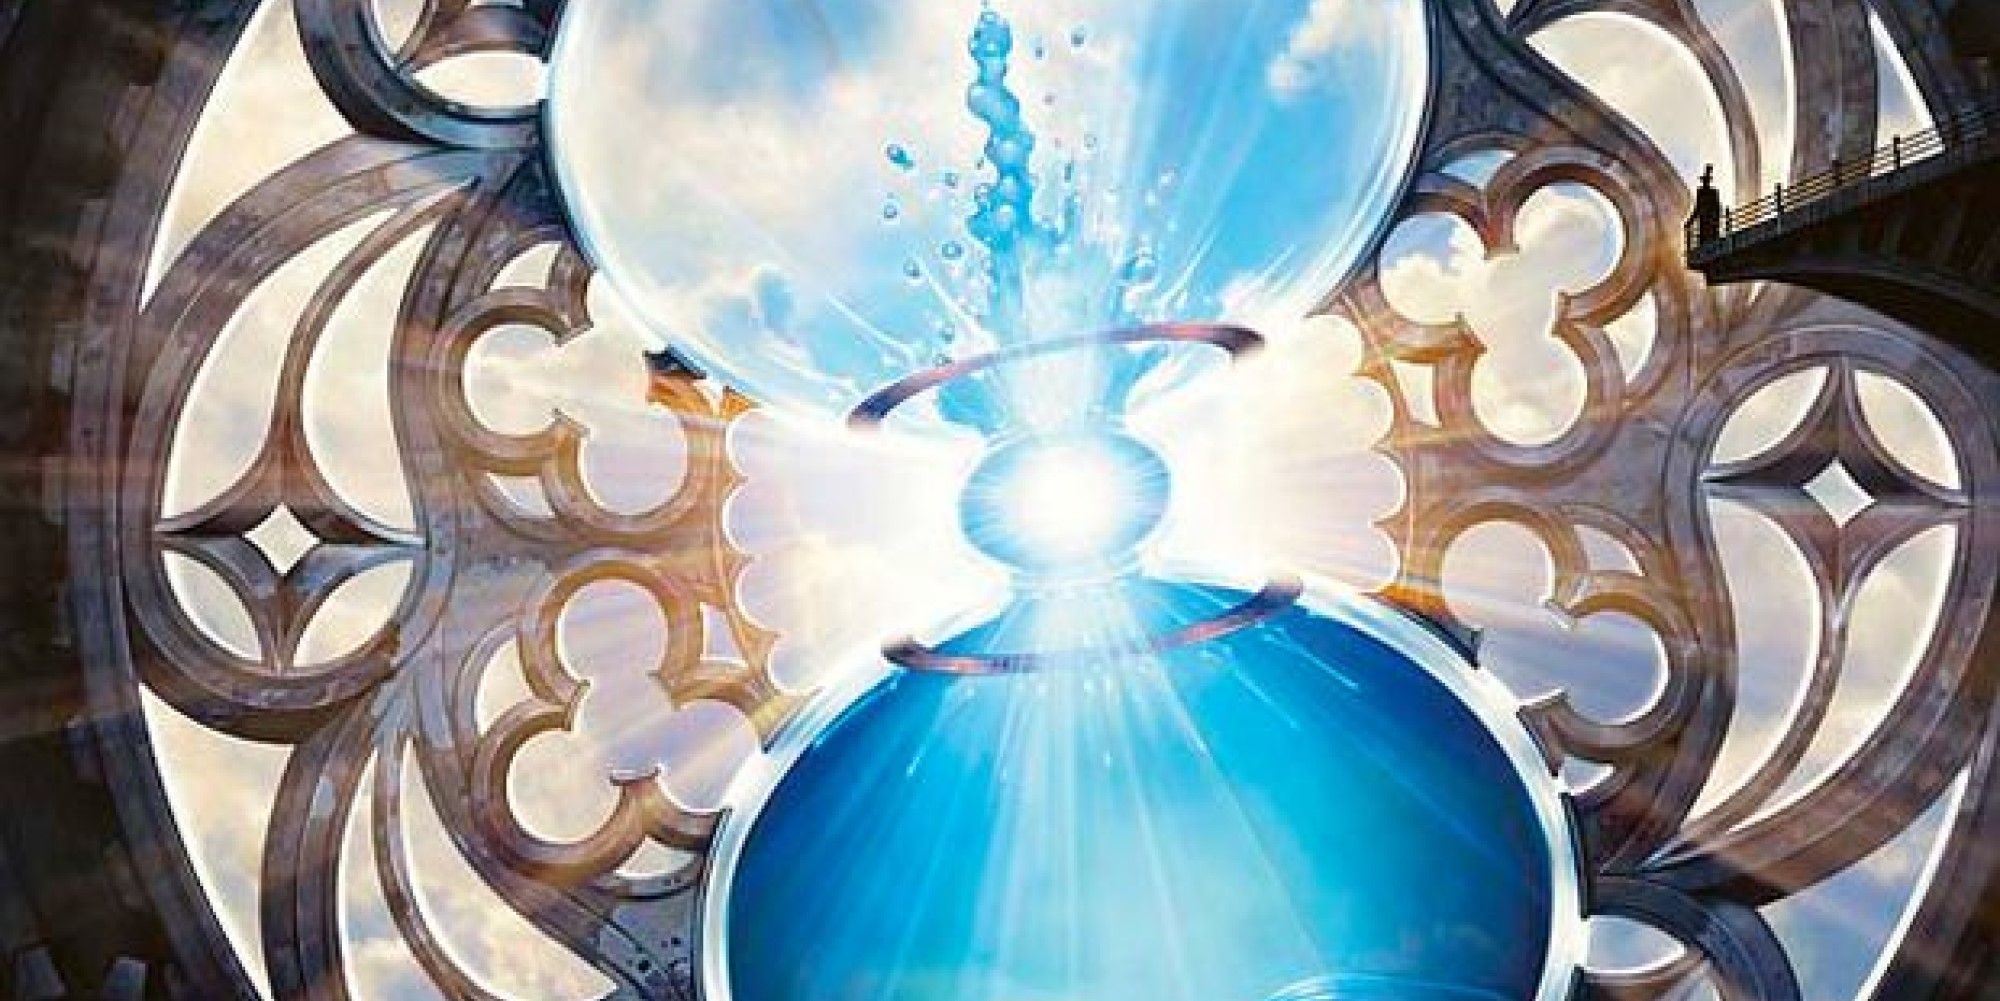 Giant hourglass filled with MTG blue liquid